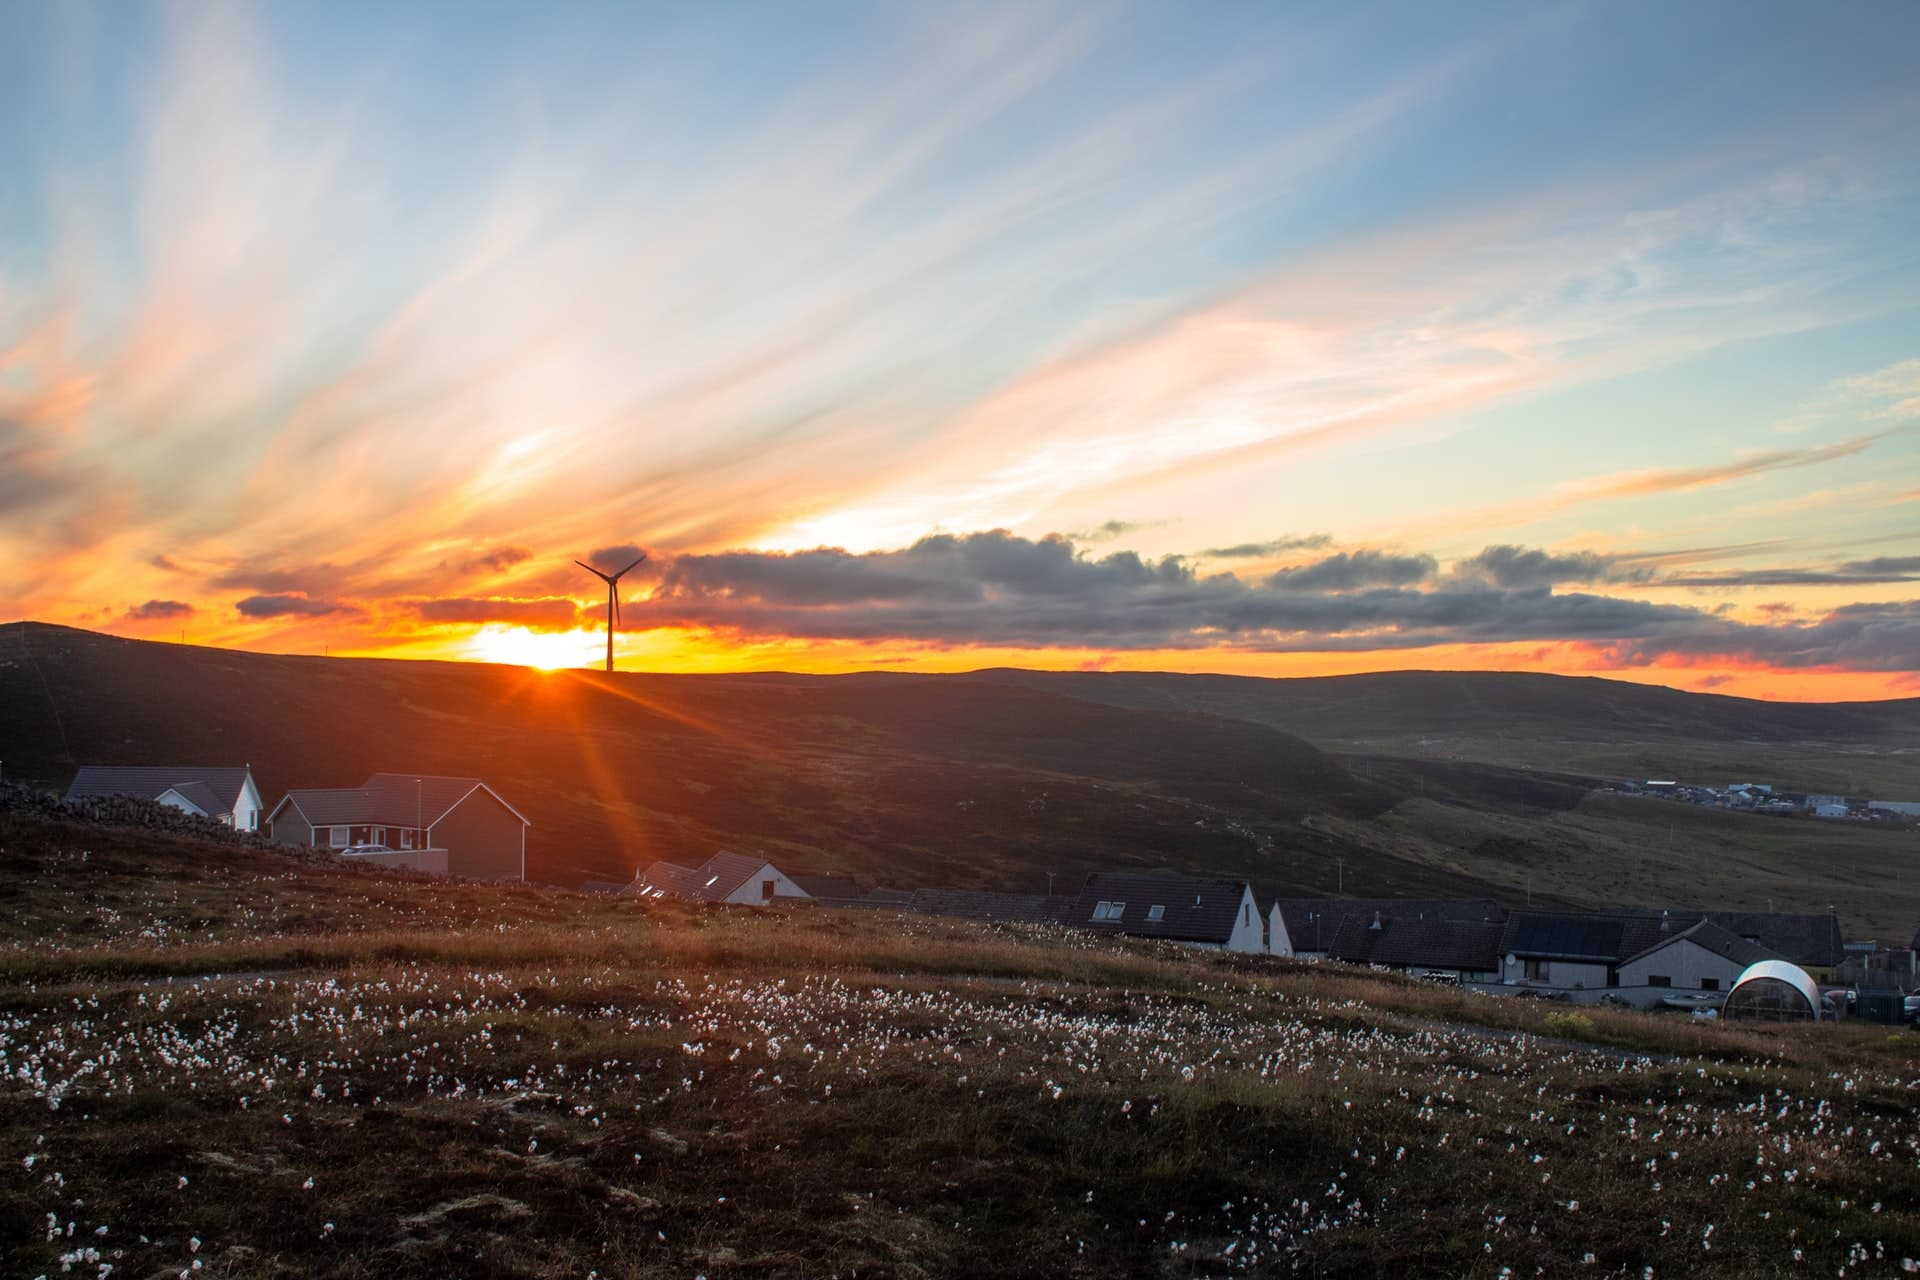 A housing settlement in Lerwick, Shetland, positioned in between hills during sunset. A single wind turbine is seen in the distance.